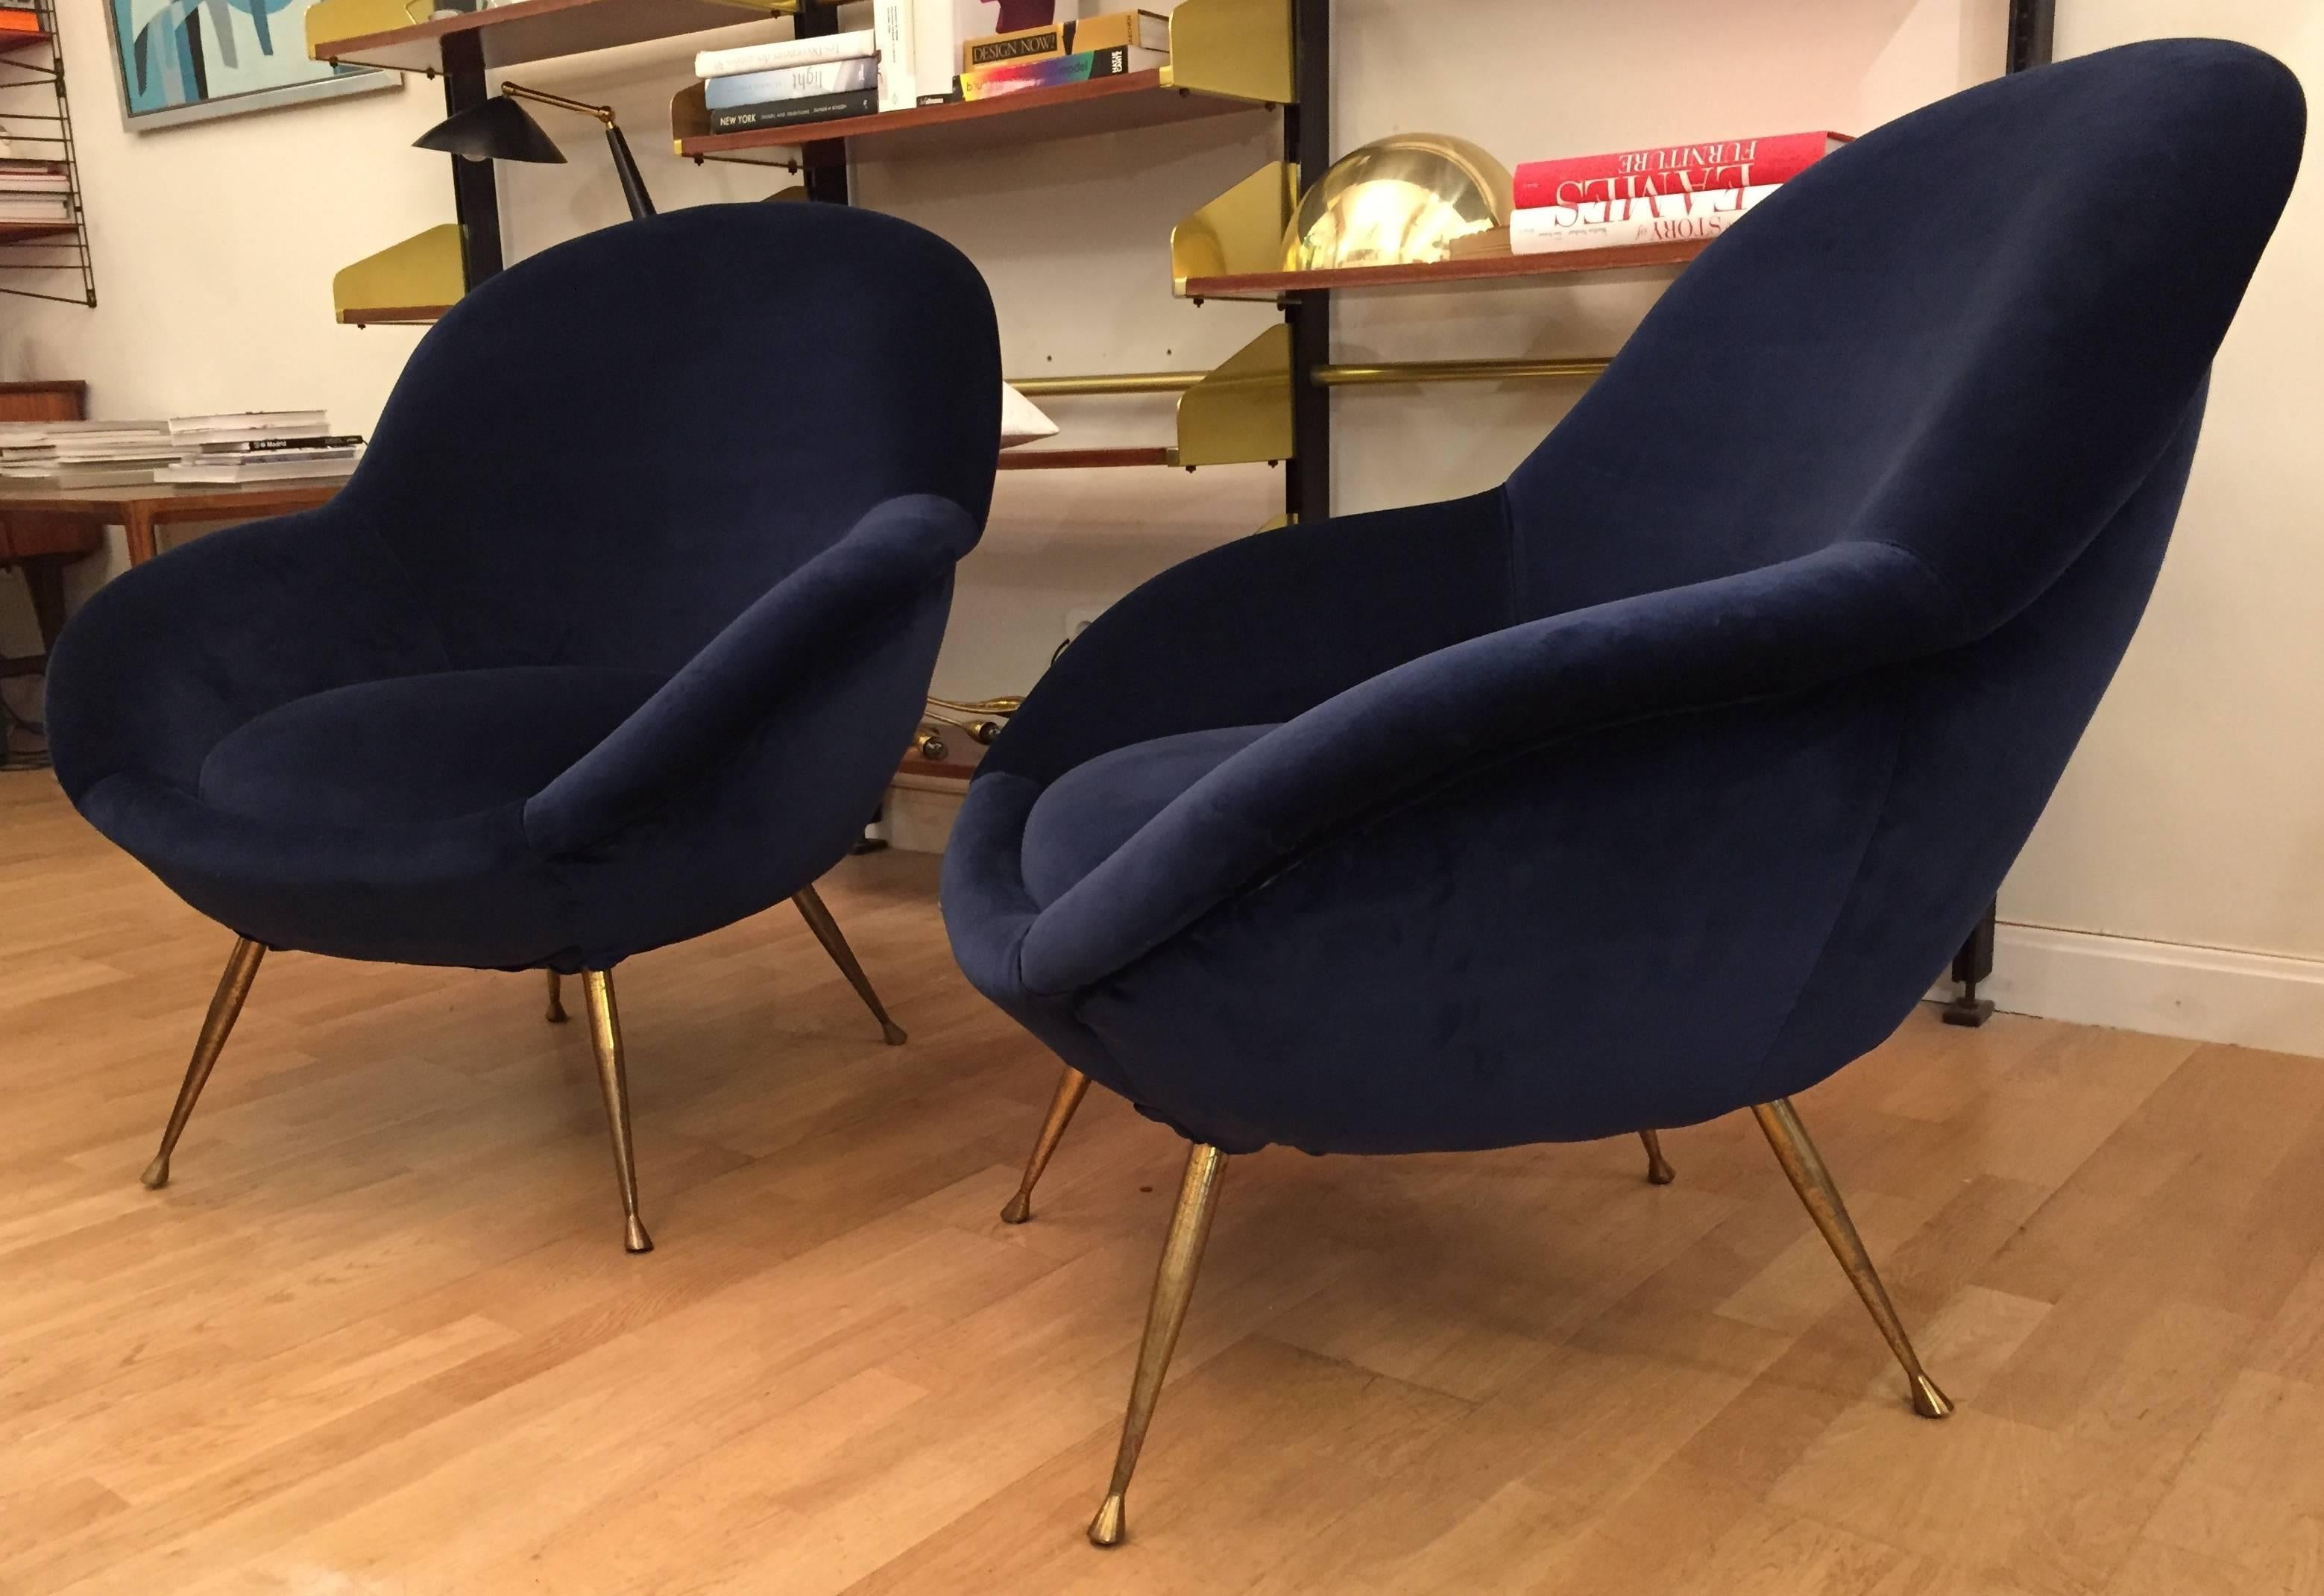 A luxury pair of Italian lounge armchairs edited by ISA in the 1950s. First quality navy velvet reupholstery and brass legs.
Impeccable and beautiful condition.
Shipping to anywhere in the world: up to 550 Euros.